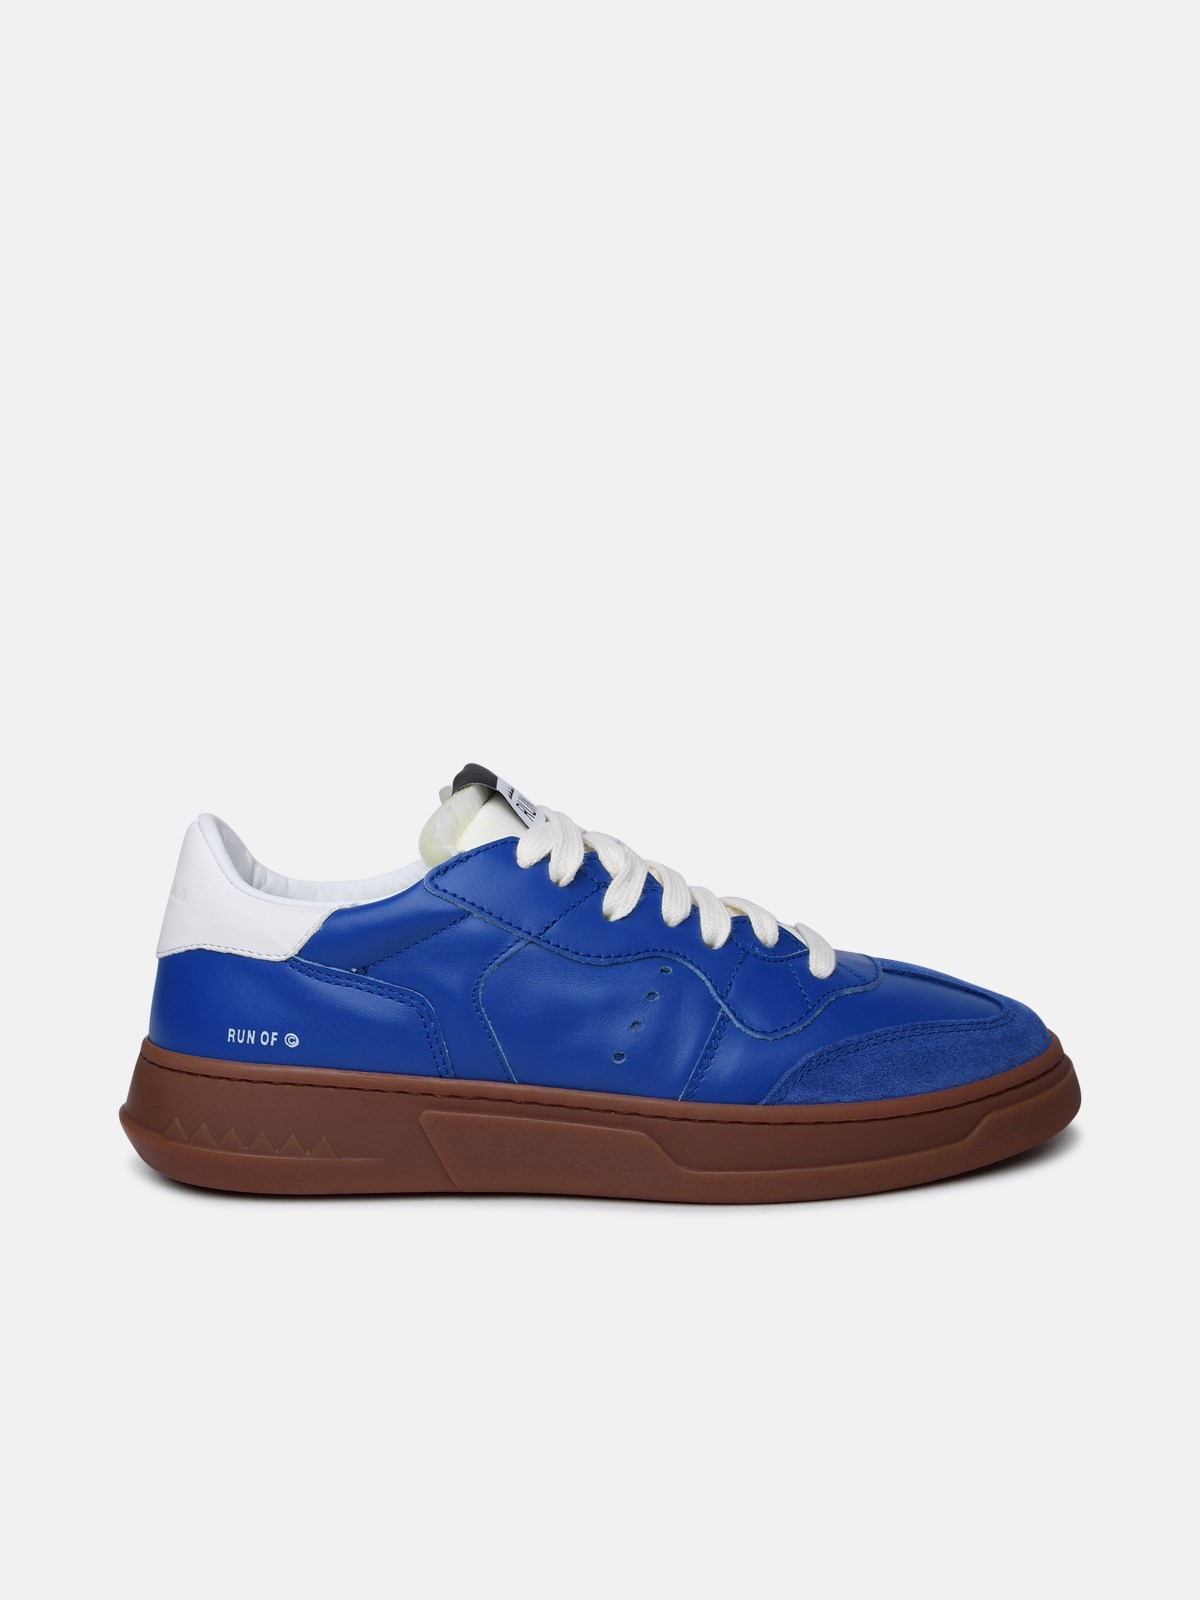 Run Of Blue Leather Sneakers